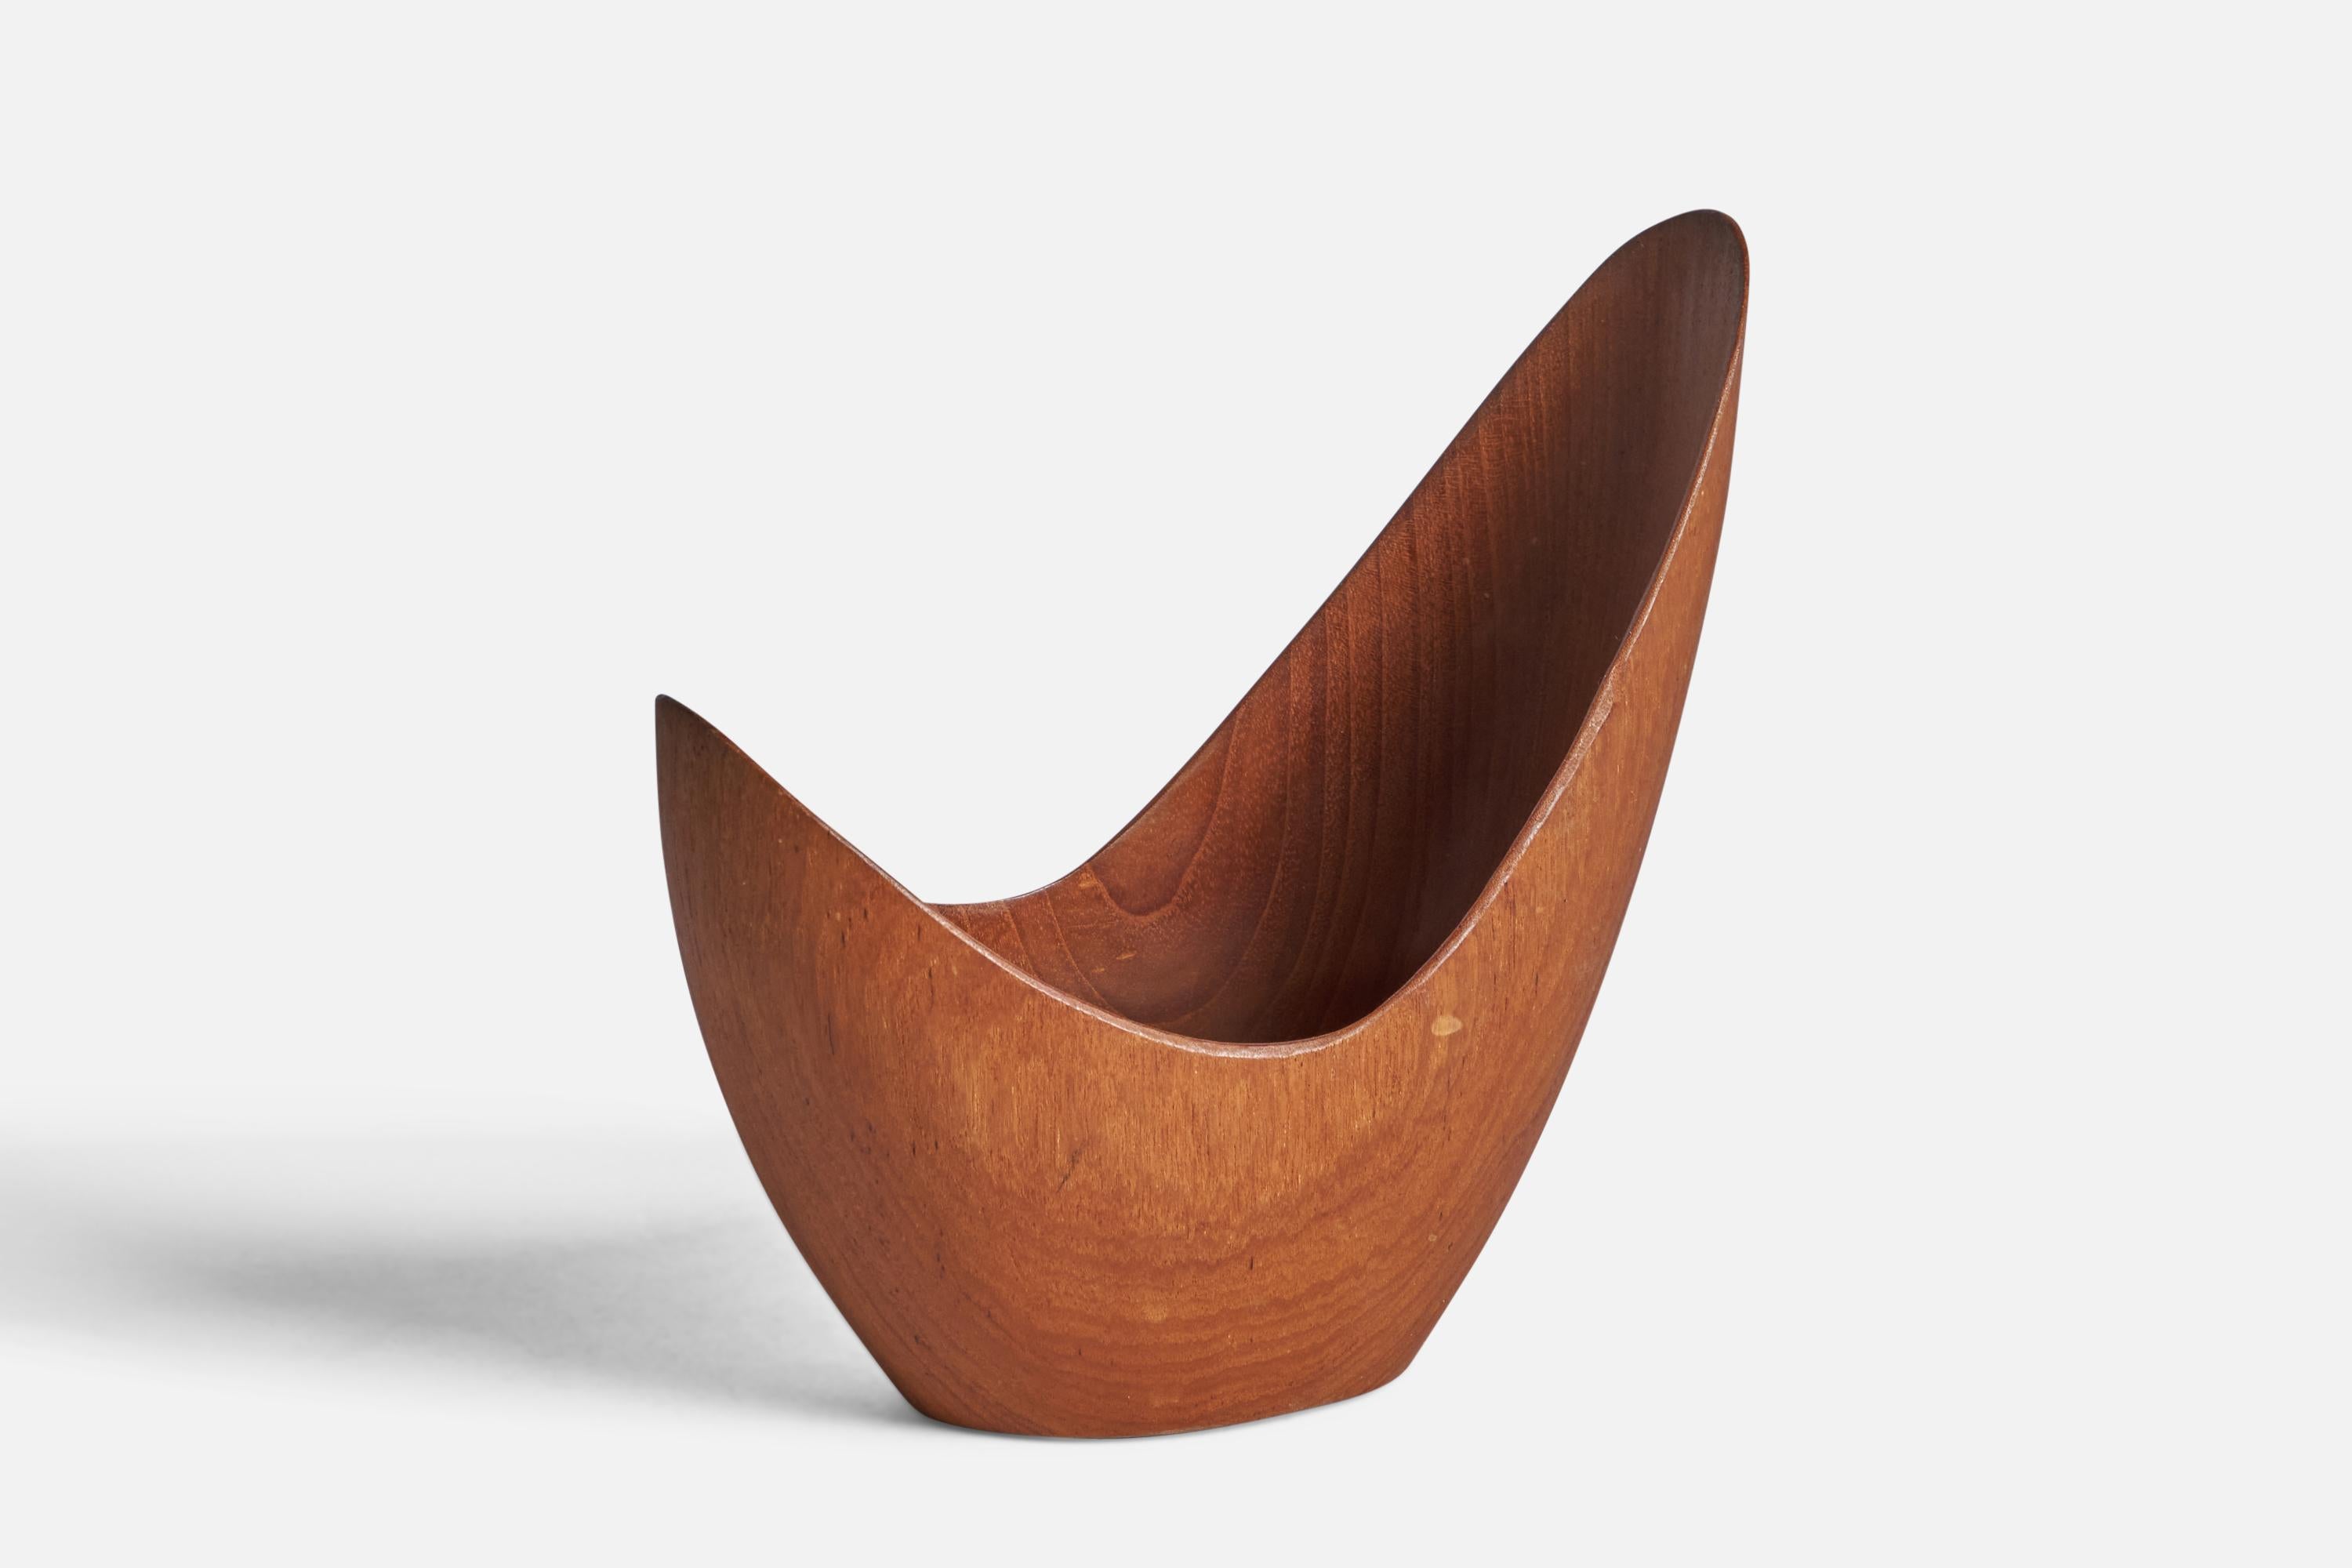 A small decorative teak bowl designed and produced by Stig Sandqvist, Sweden, 1950s.